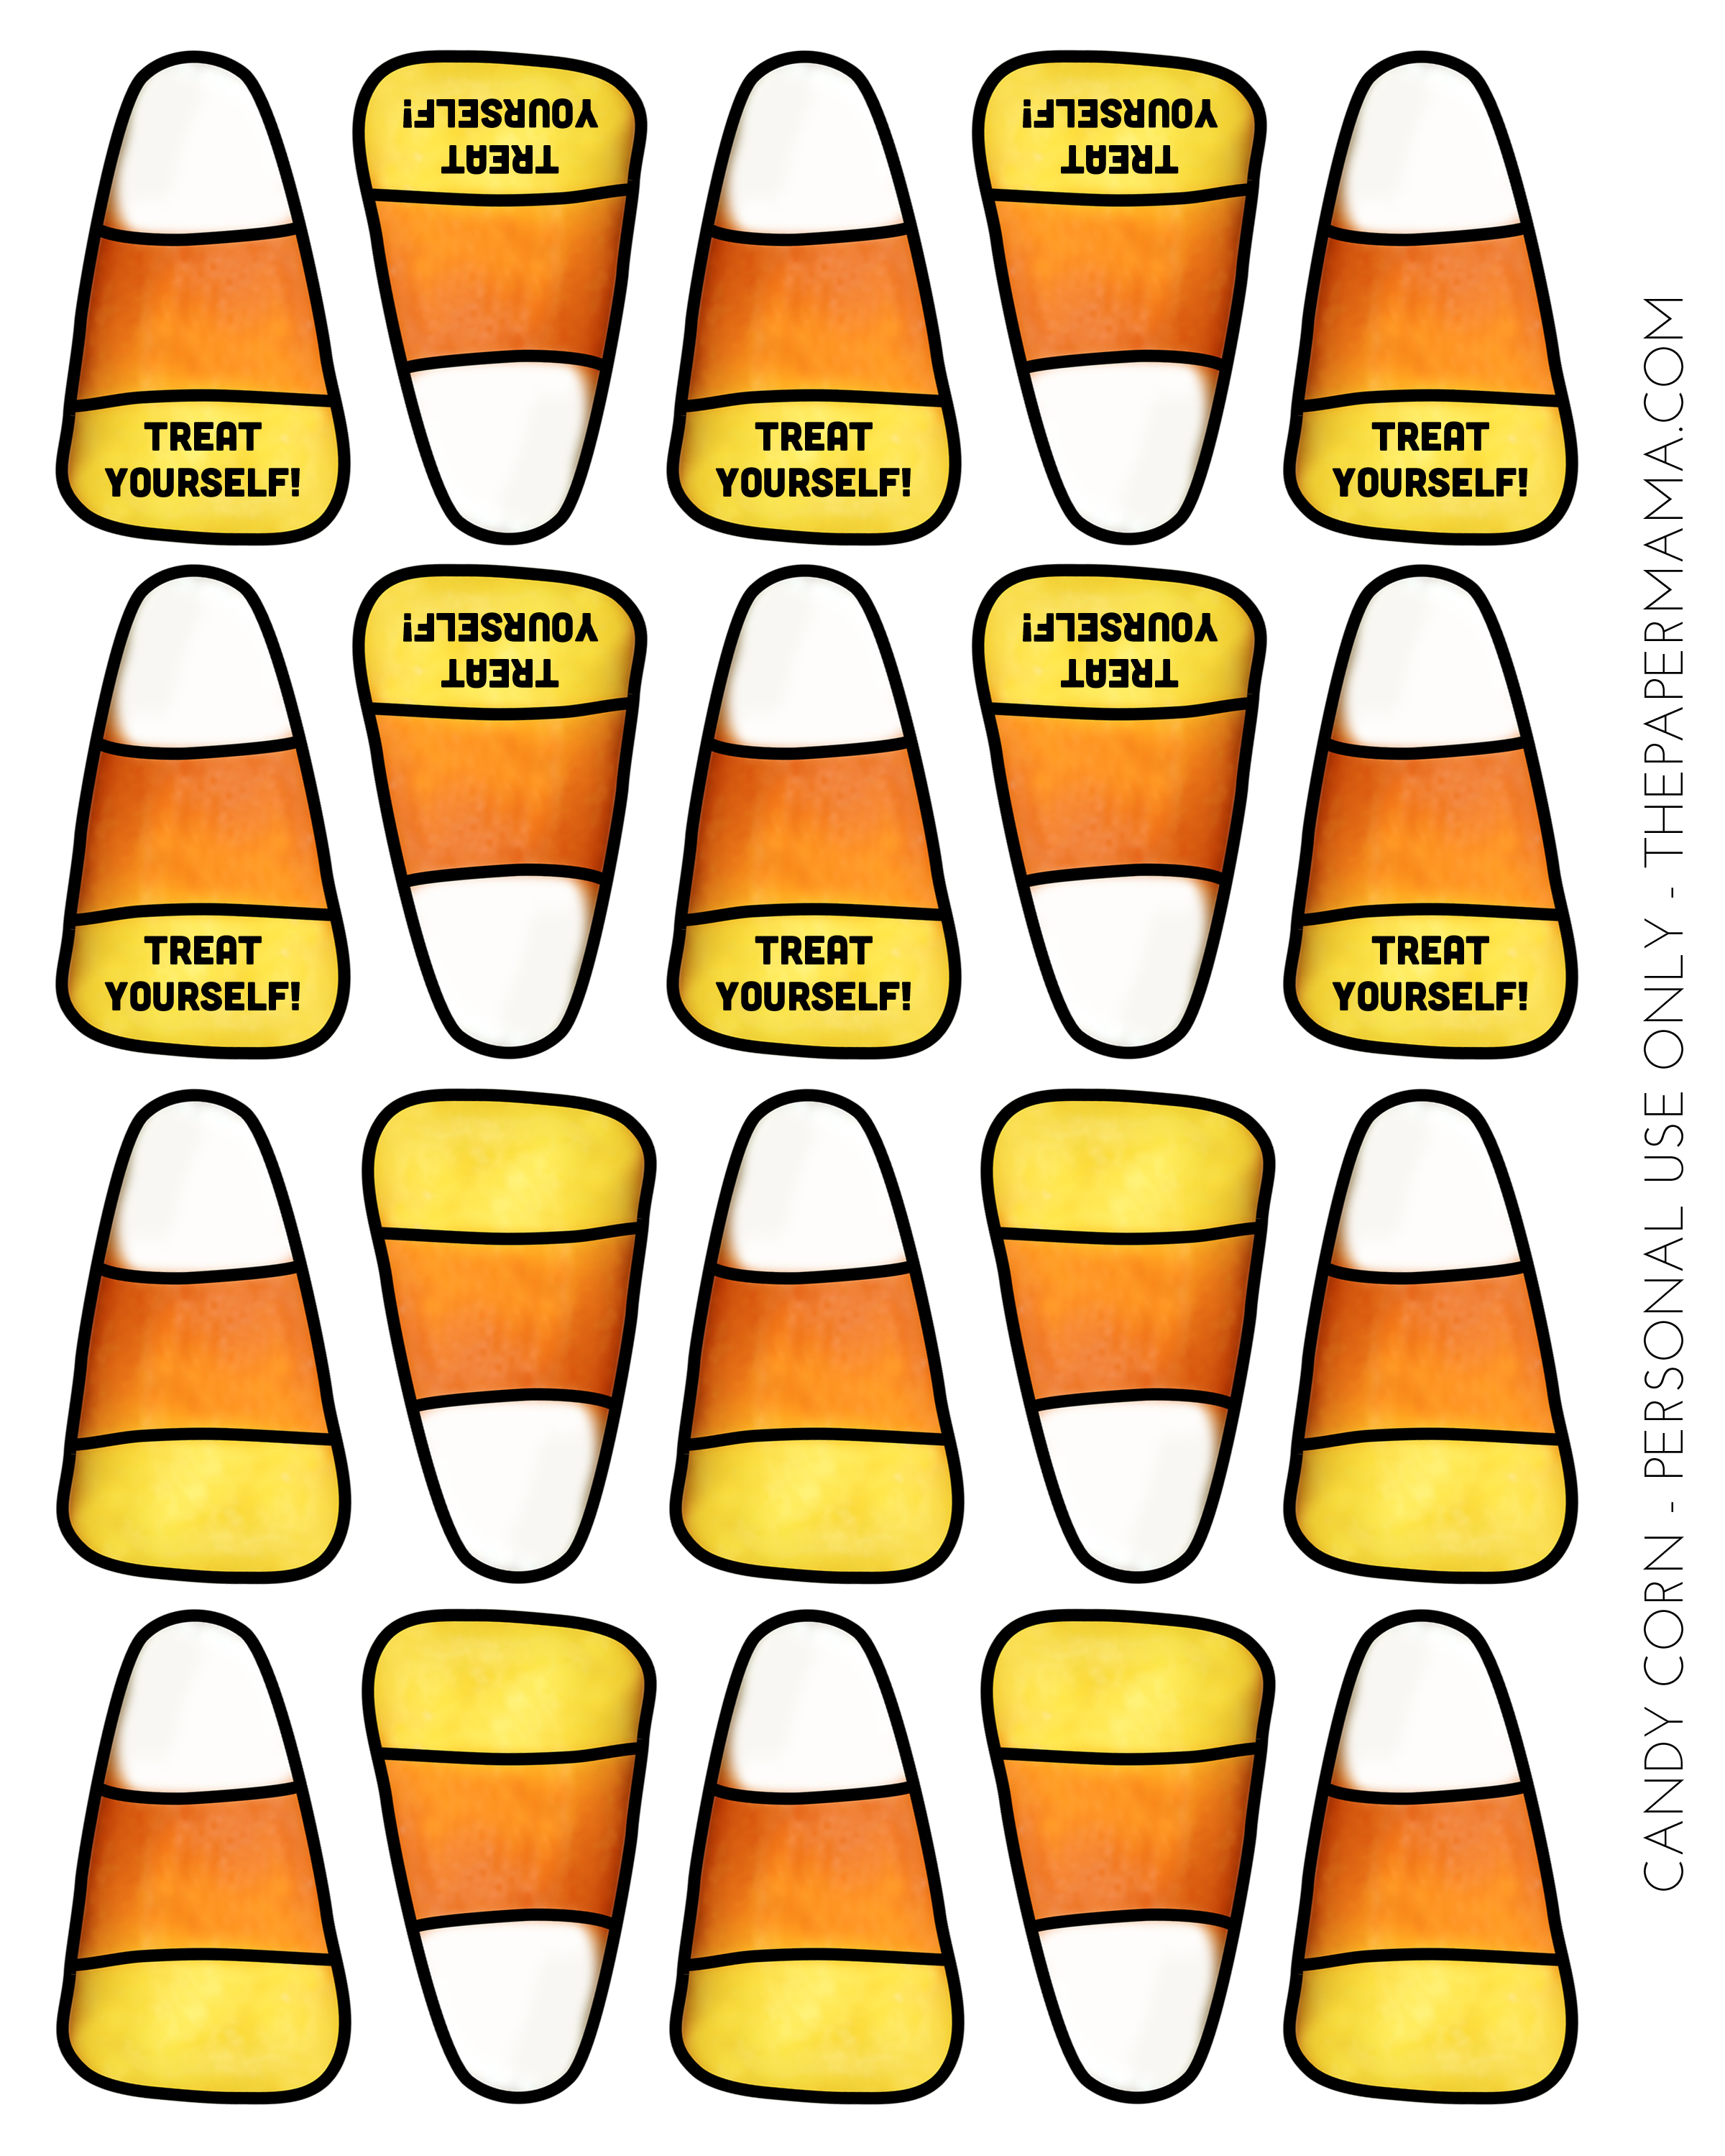 7 Best Images of Candy Corn Printable - Candy Corn Template, Candy ...